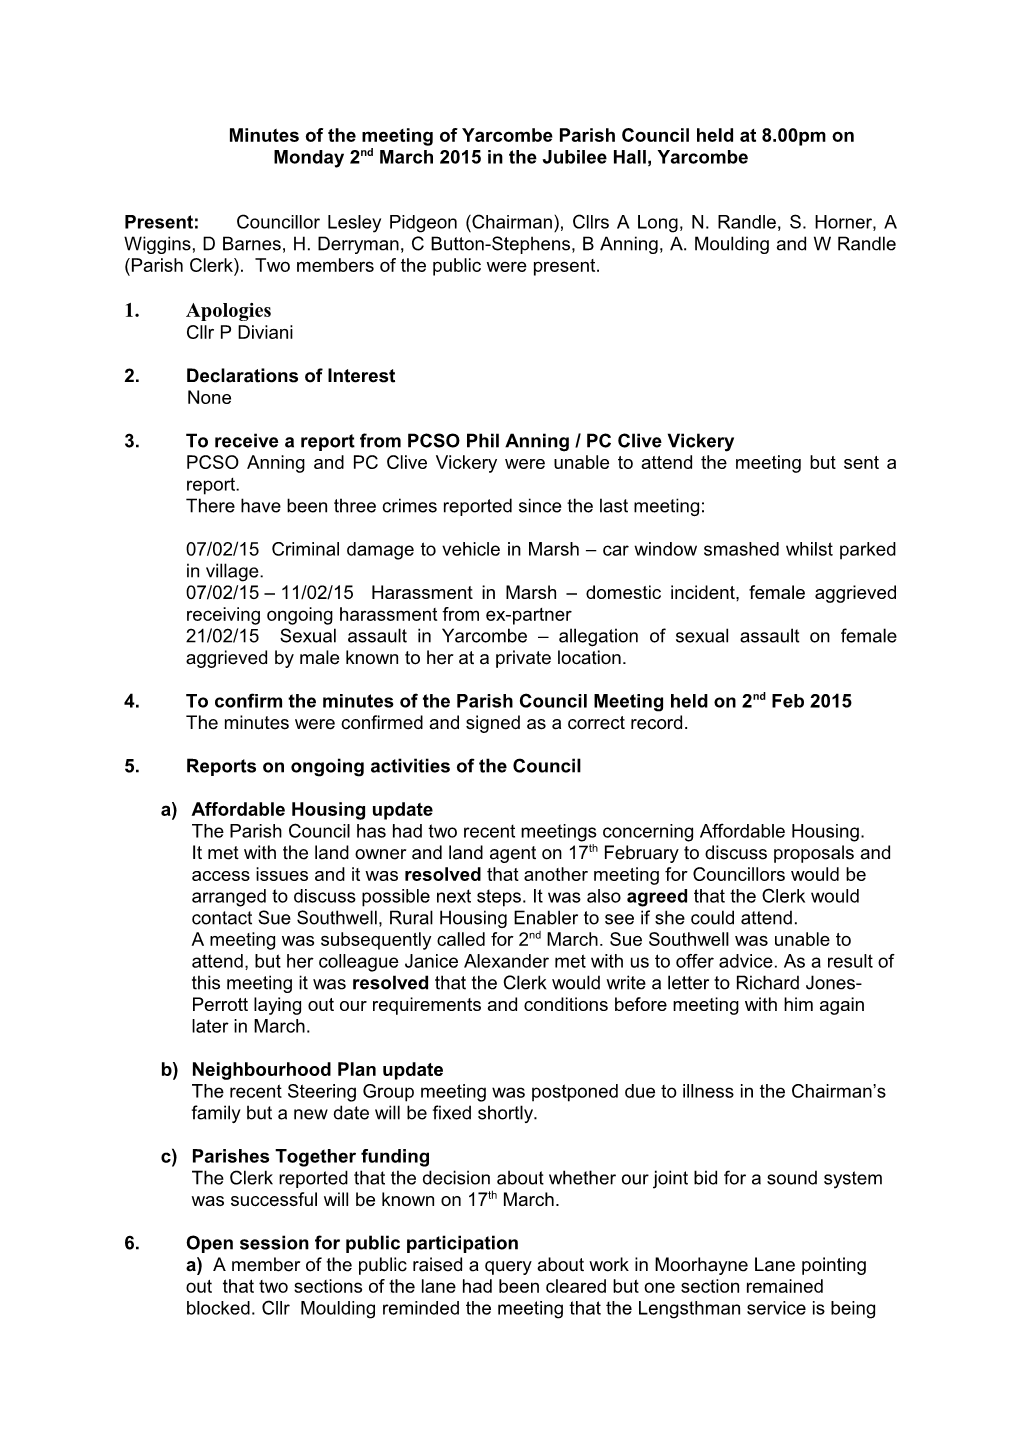 Minutes of the Meeting of Yarcombe Parish Council Held at 8.00Pm On